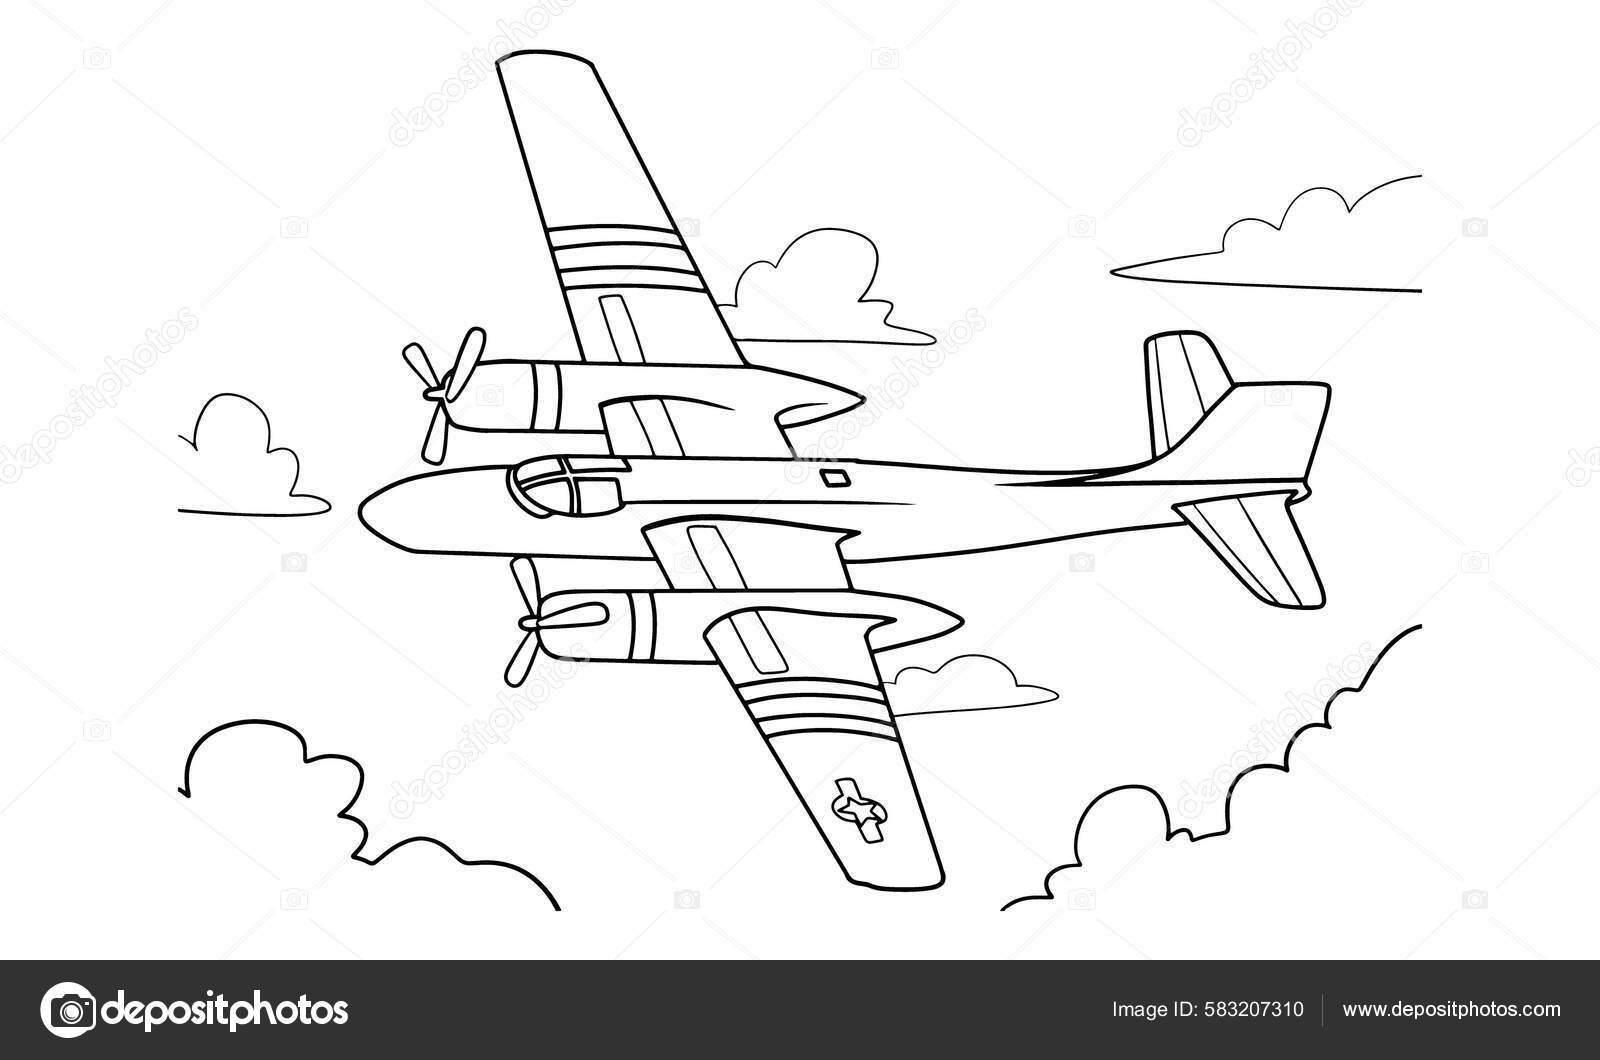 How To Draw Airplanes Easy - Apps on Google Play